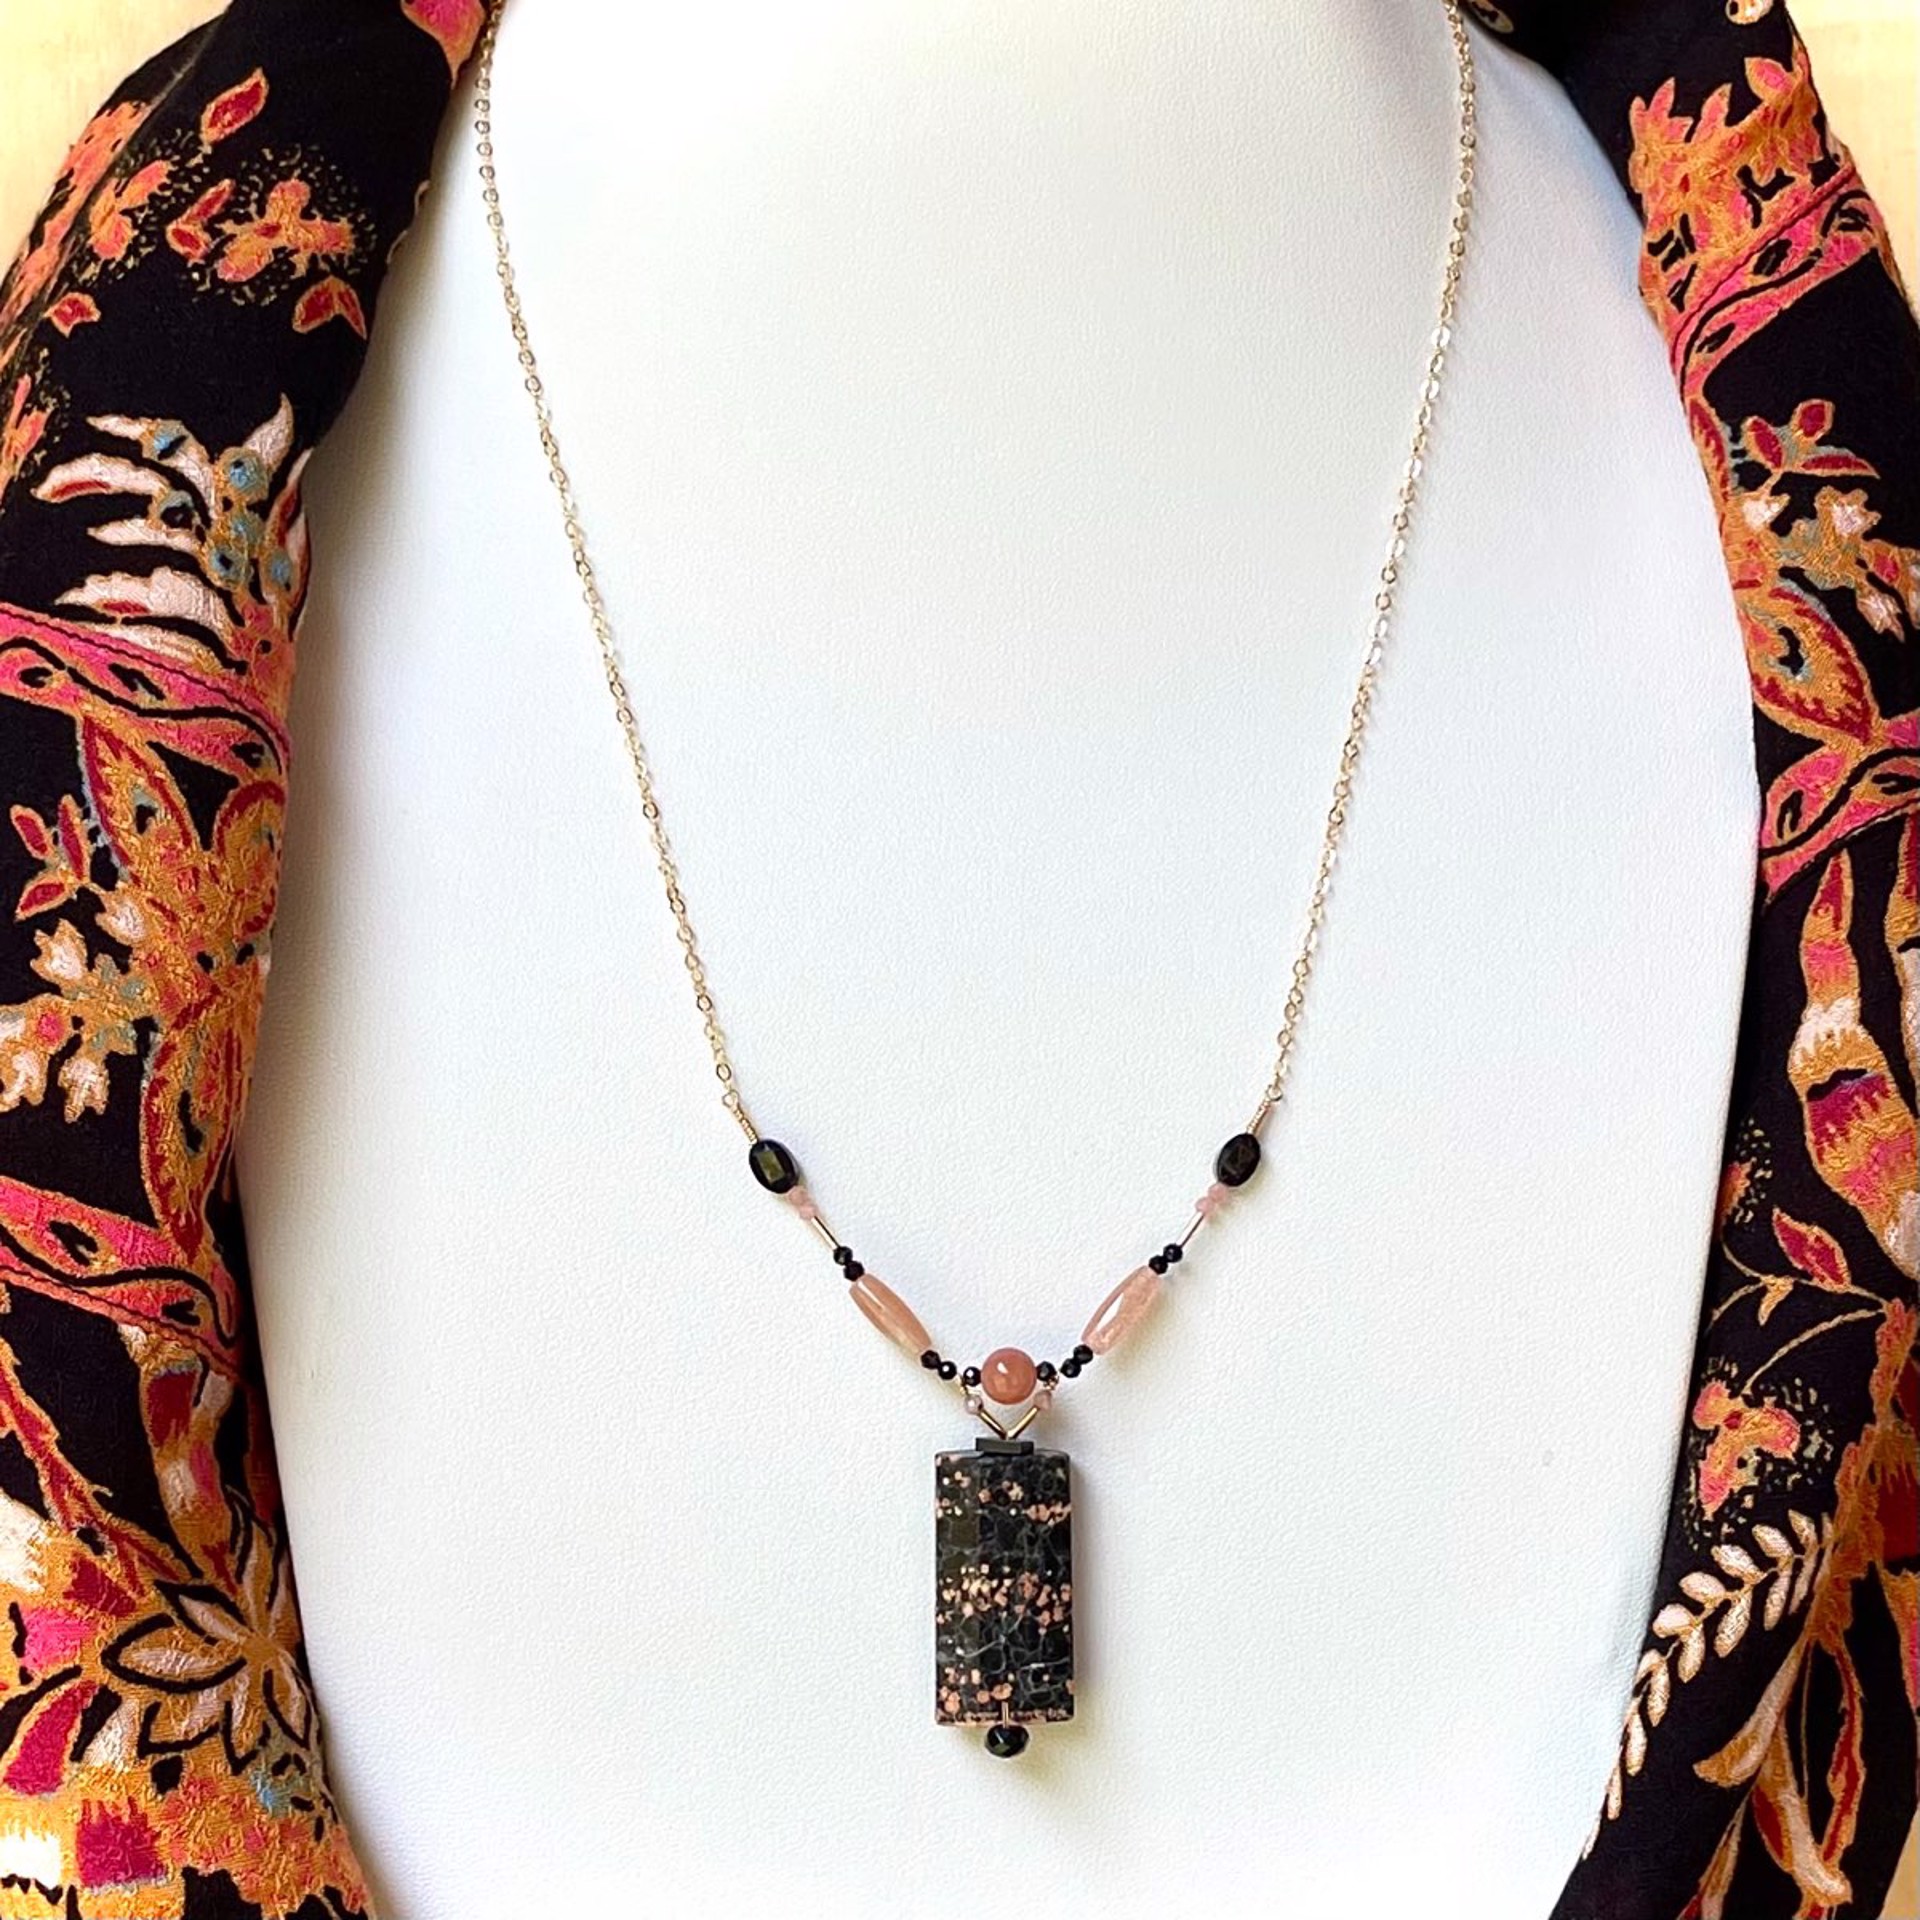 Red Snowflake Obsidian with Rhodochrosite, Black Spinel and Peach Moonstone 14K Gold Fill Vertical Necklace by Lisa Kelley